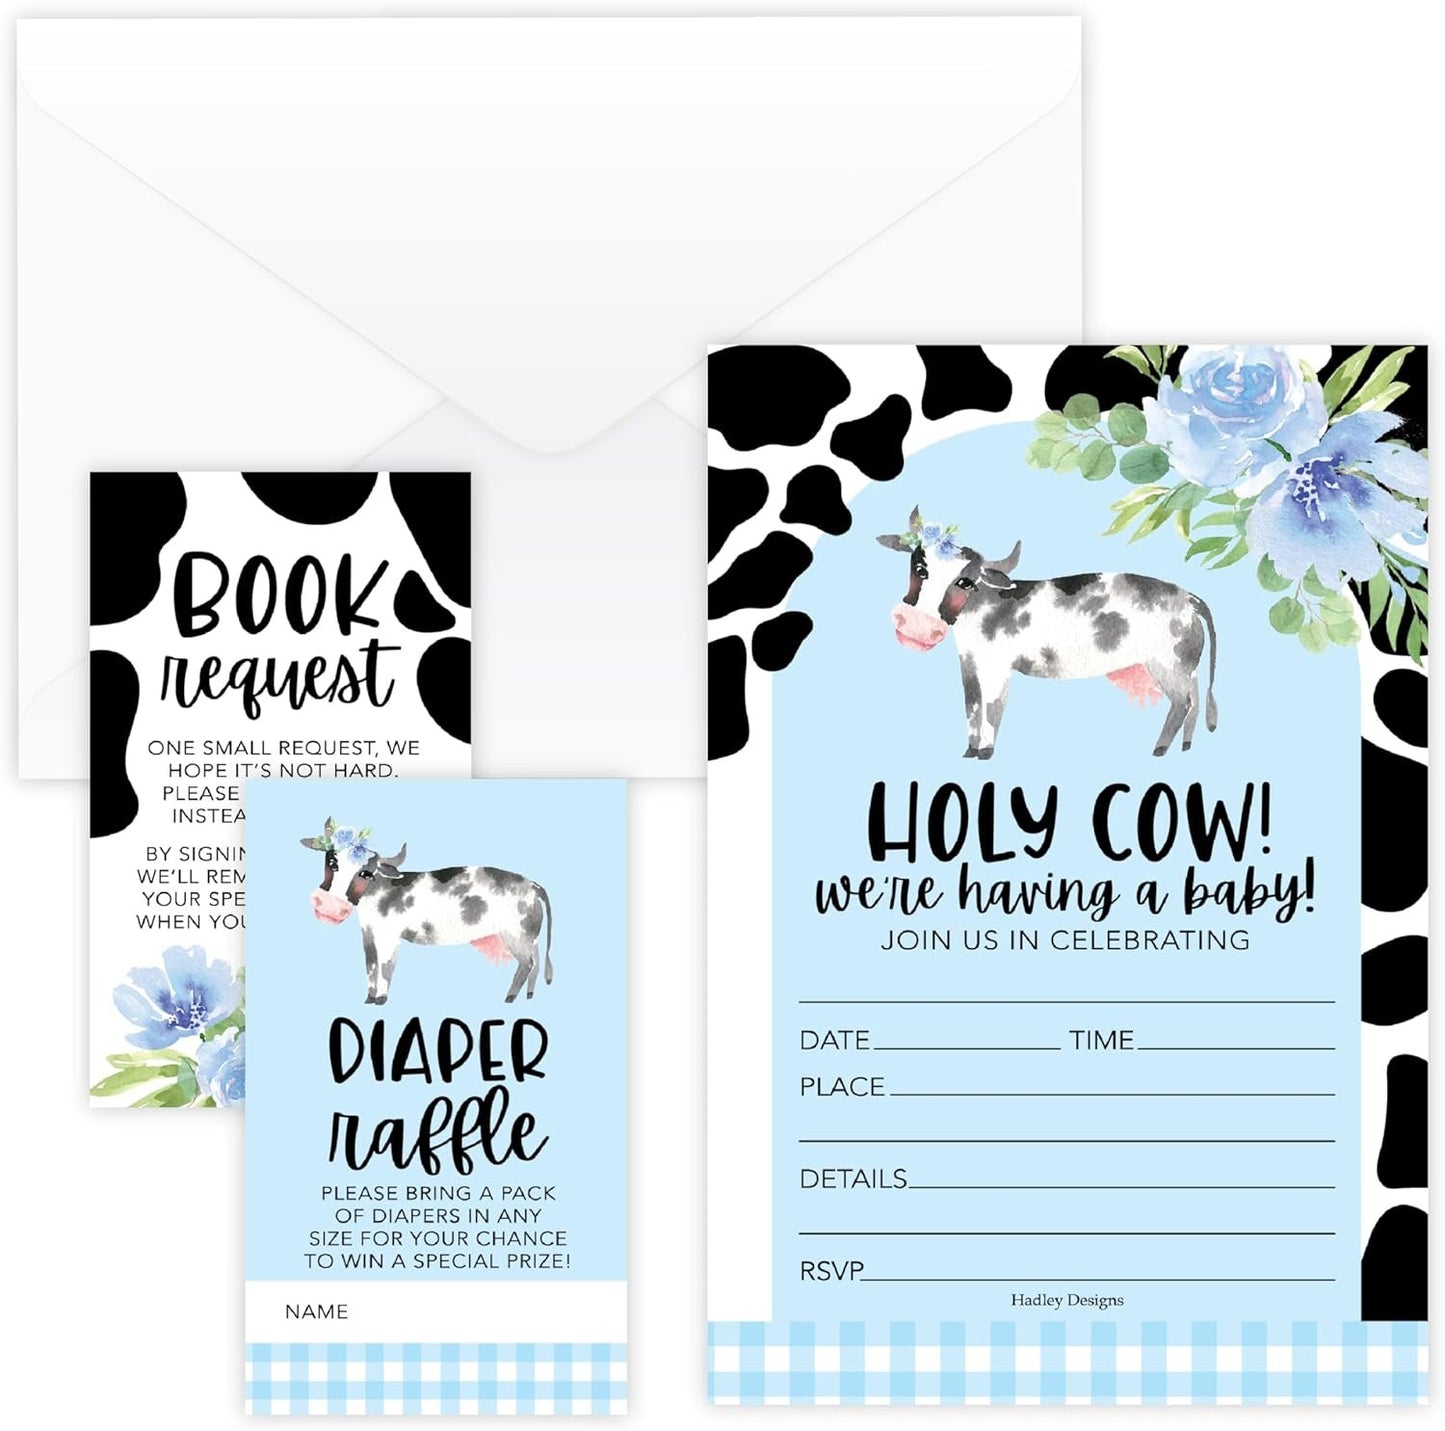 15 Holy Cow Baby Shower Invitations For Boy Baby Shower Ideas - Boy Baby Shower Invites For Boy, Boy Baby Shower Invitations Boy With Diaper Raffle, Baby Boy Shower Invitations, Baby Invitations